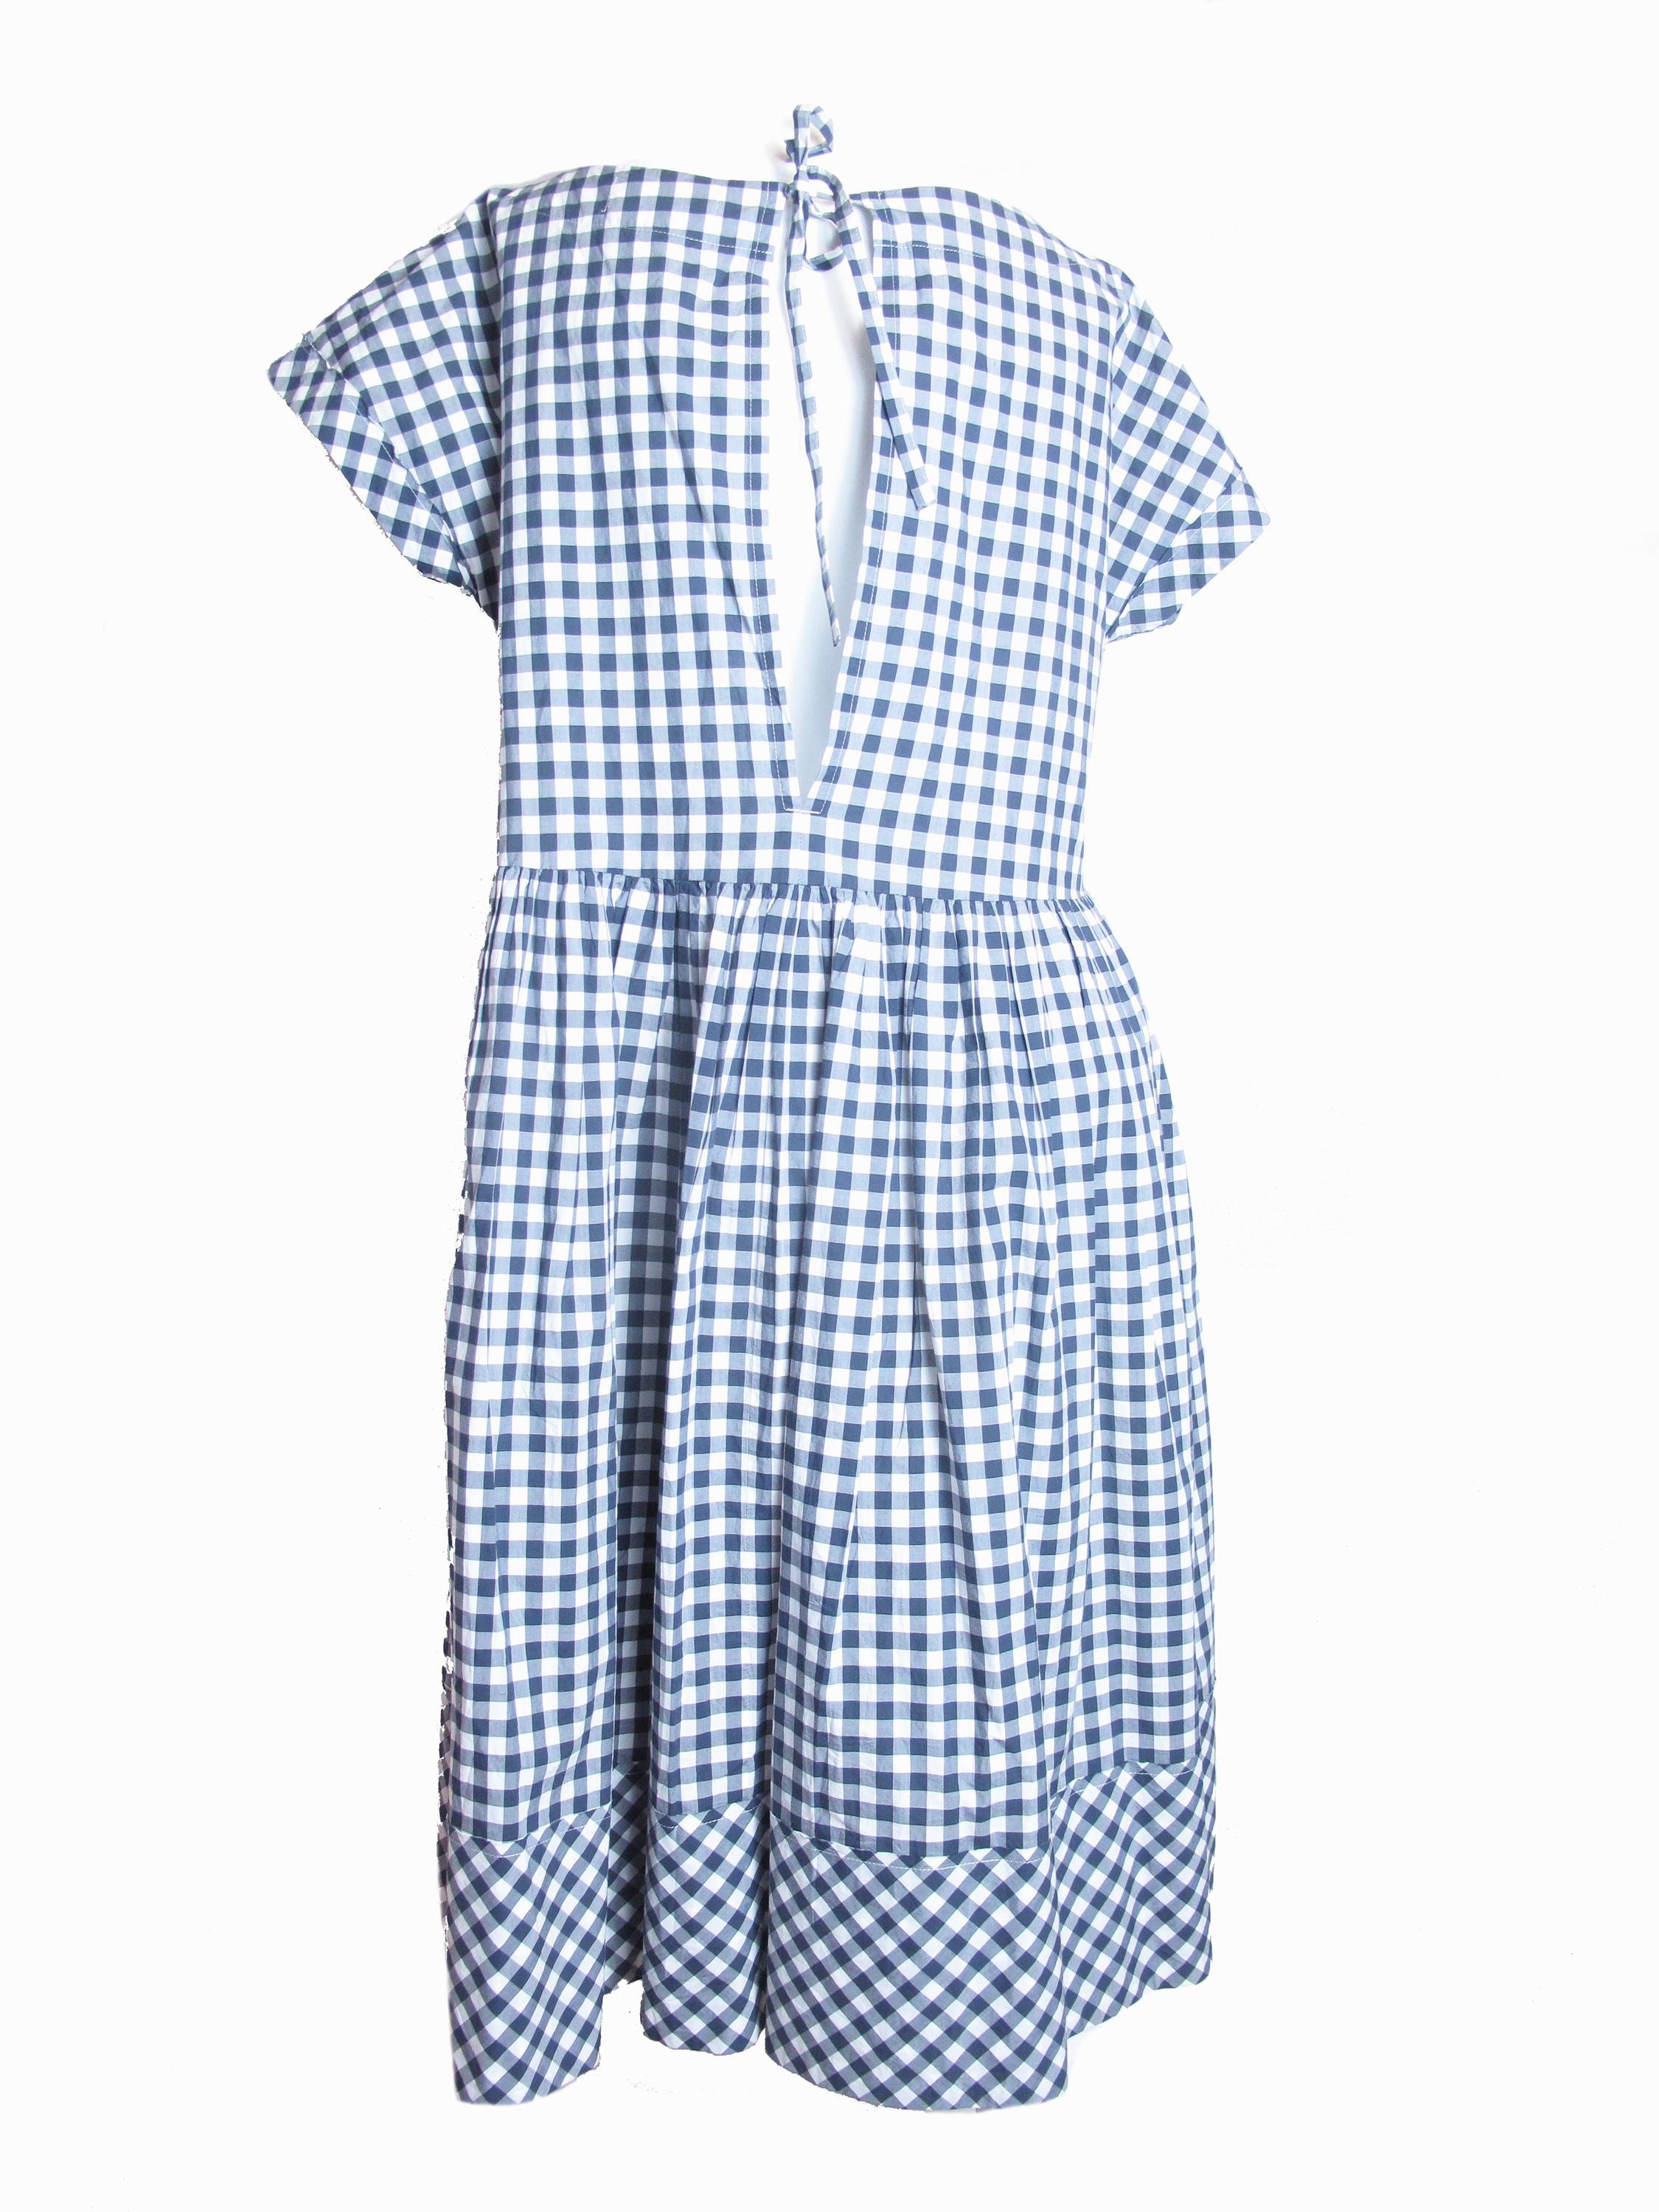 Comme des Garcons Tricot oversized blue and white cotton gingham dress.  Tie at neck at back. circa 2014. Size M